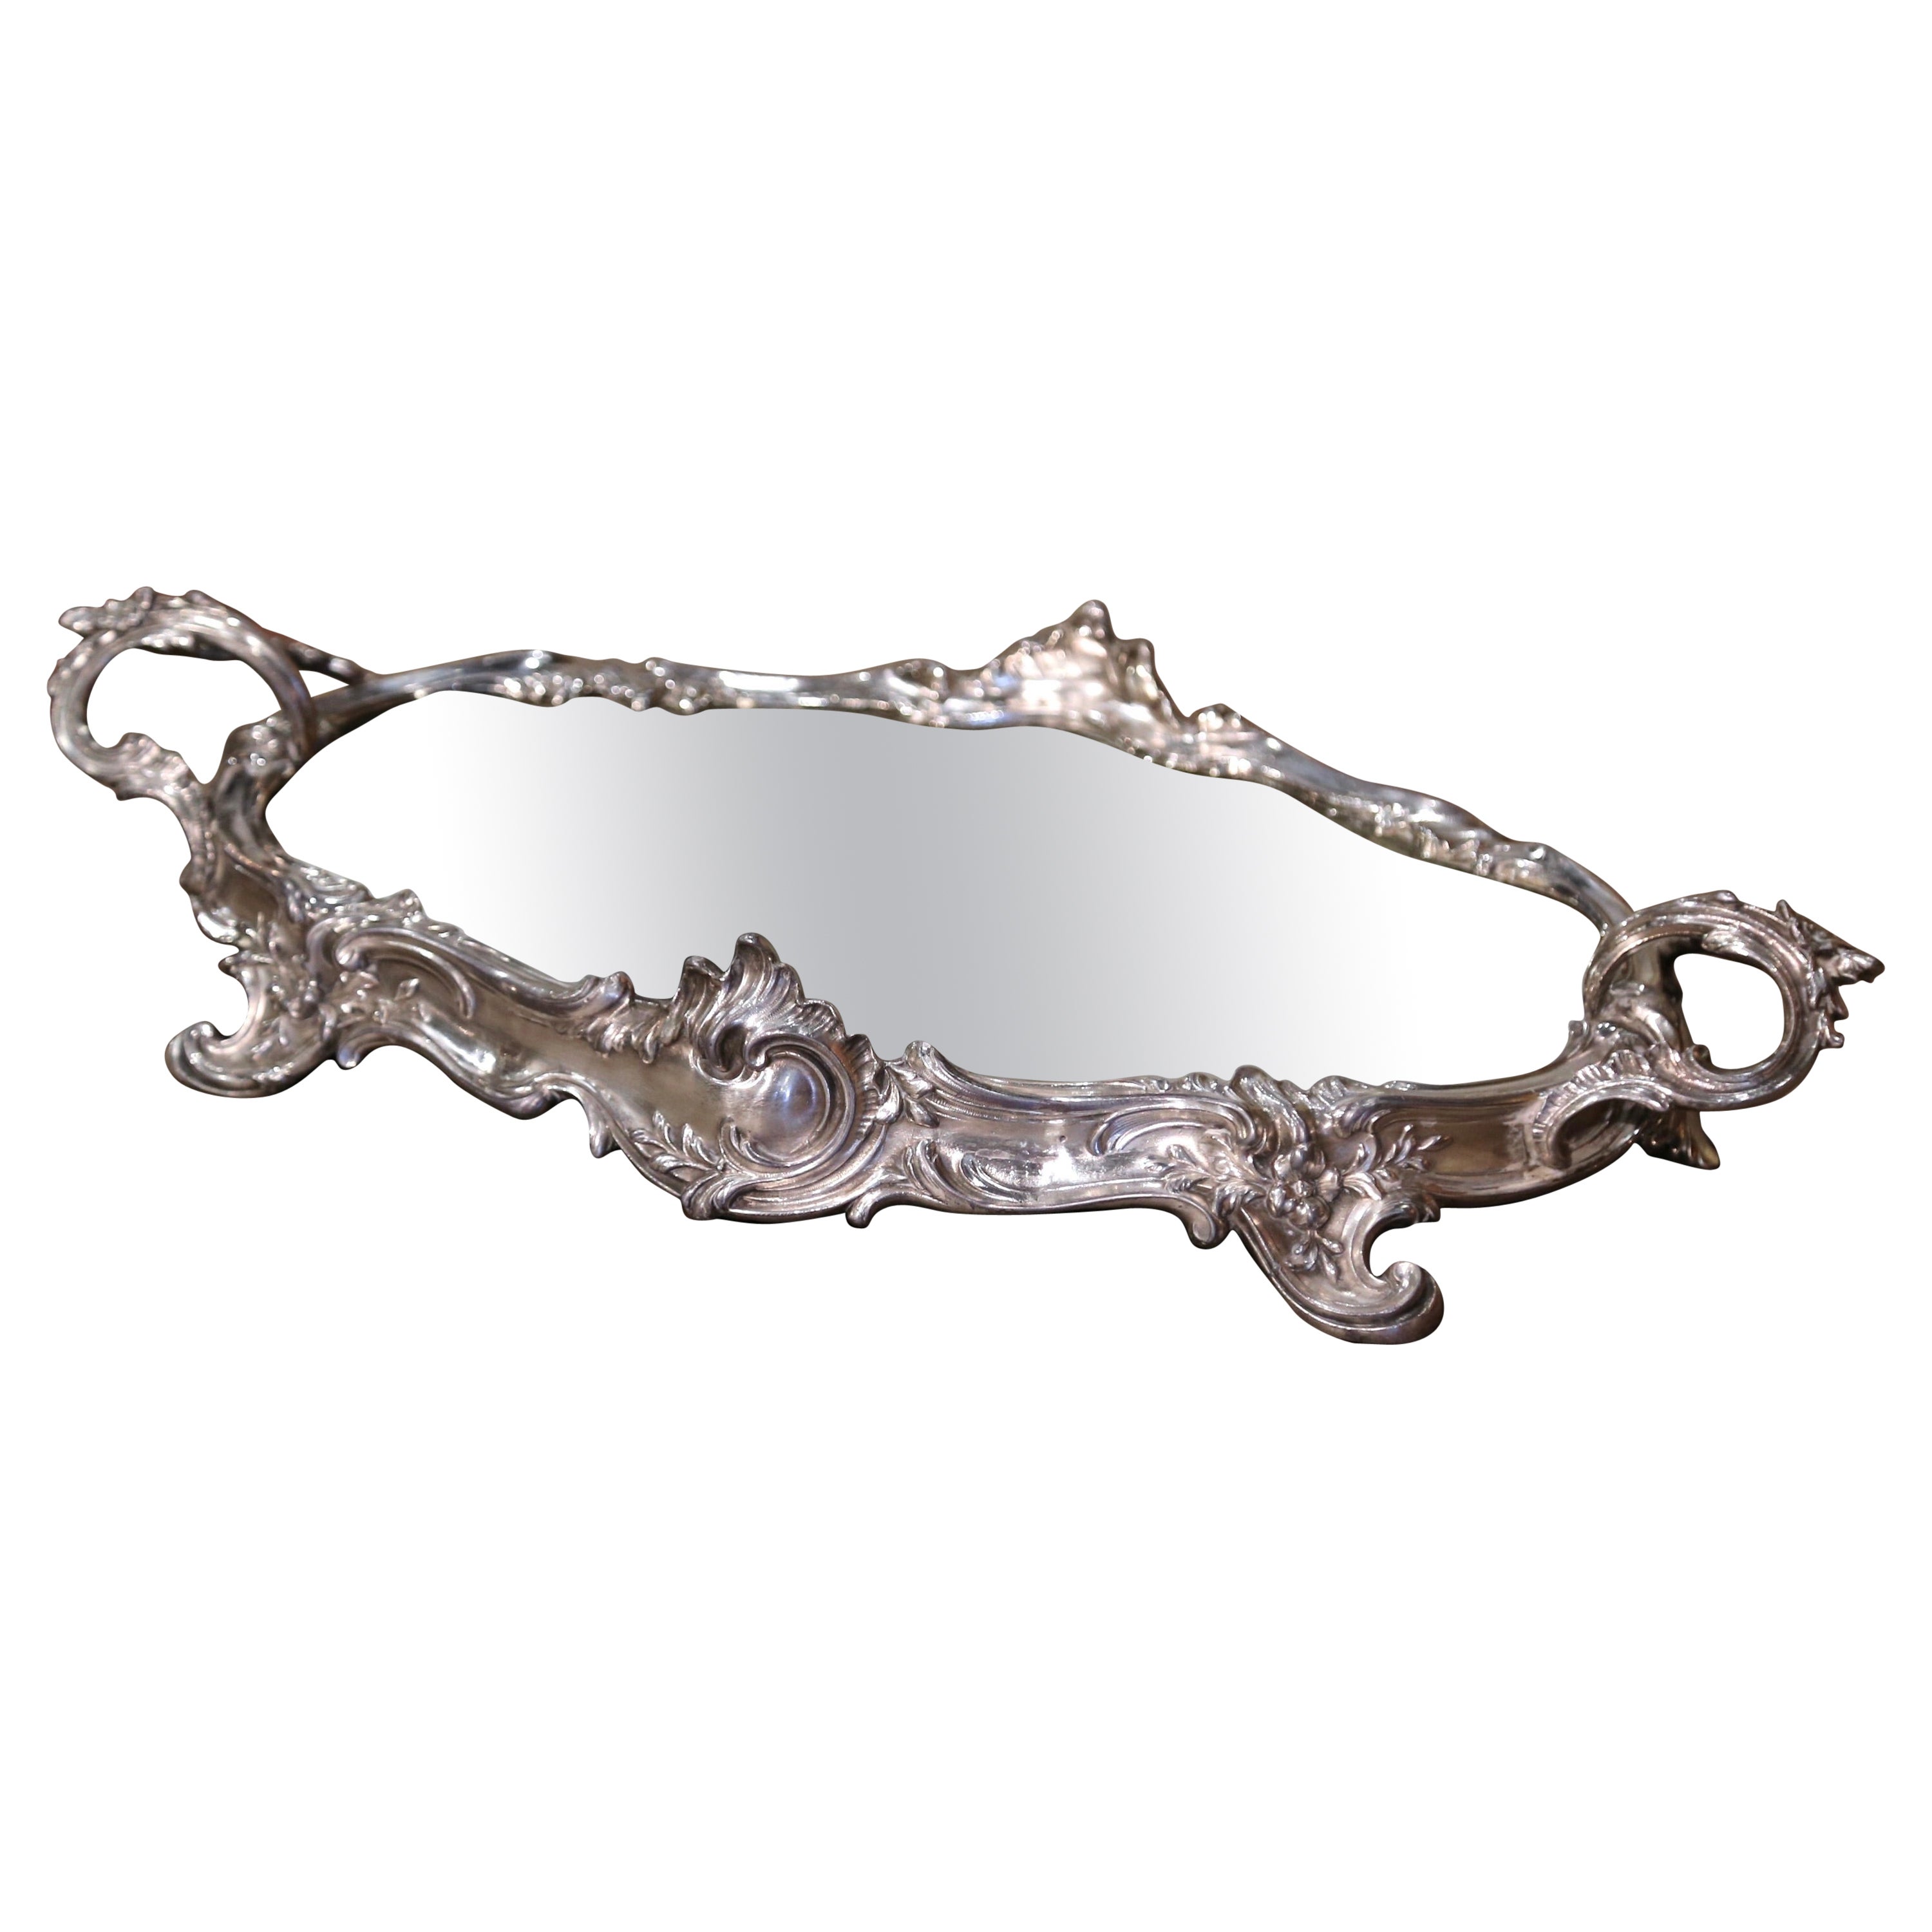 19th Century French Louis XV Silverplated Bronze Mirrored Plateau Table Surtout  For Sale